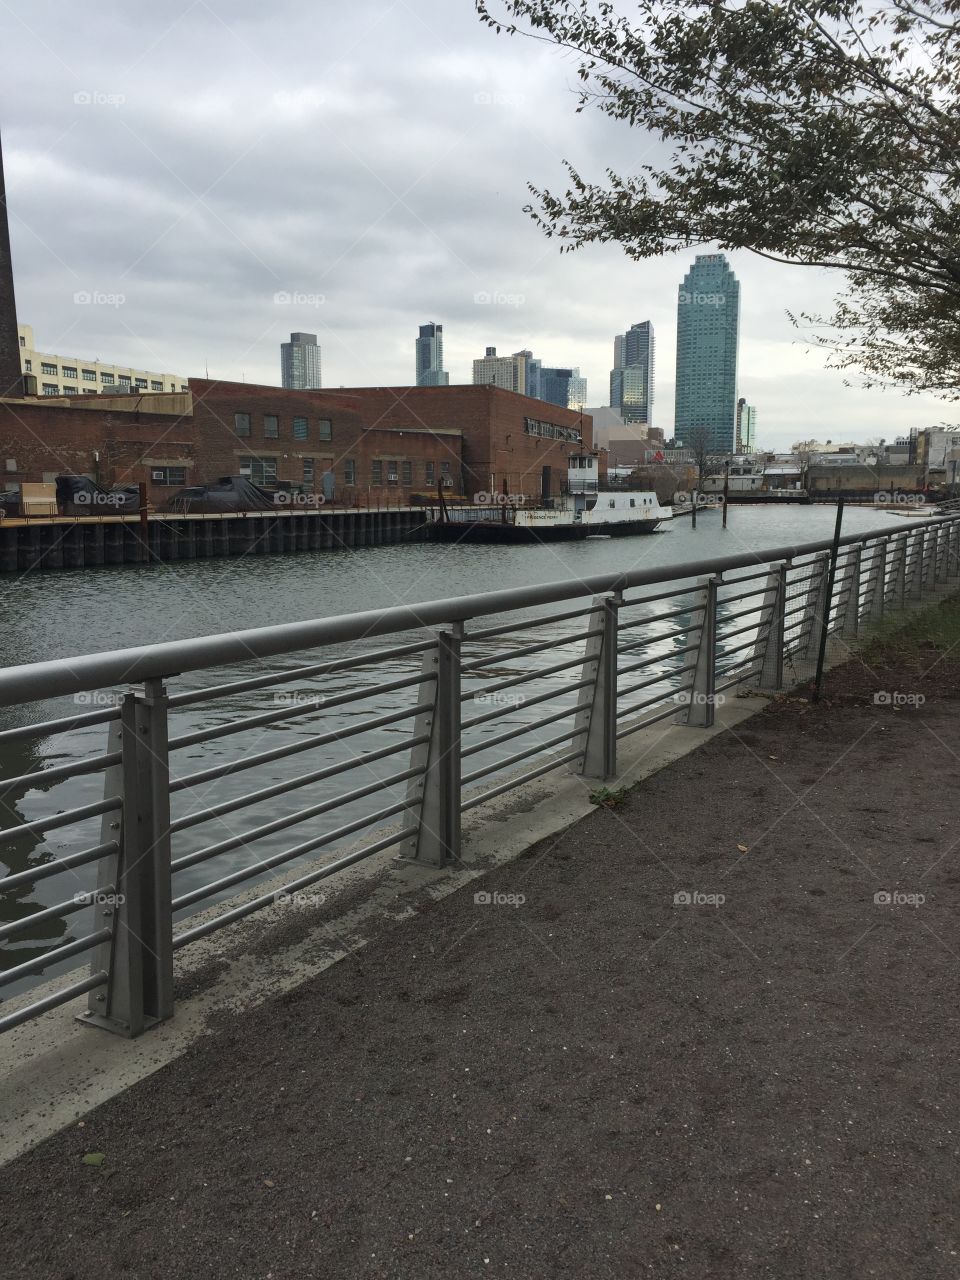 Photo of a walking tail near a river and in the distance you can see New York cities skyscrapers.